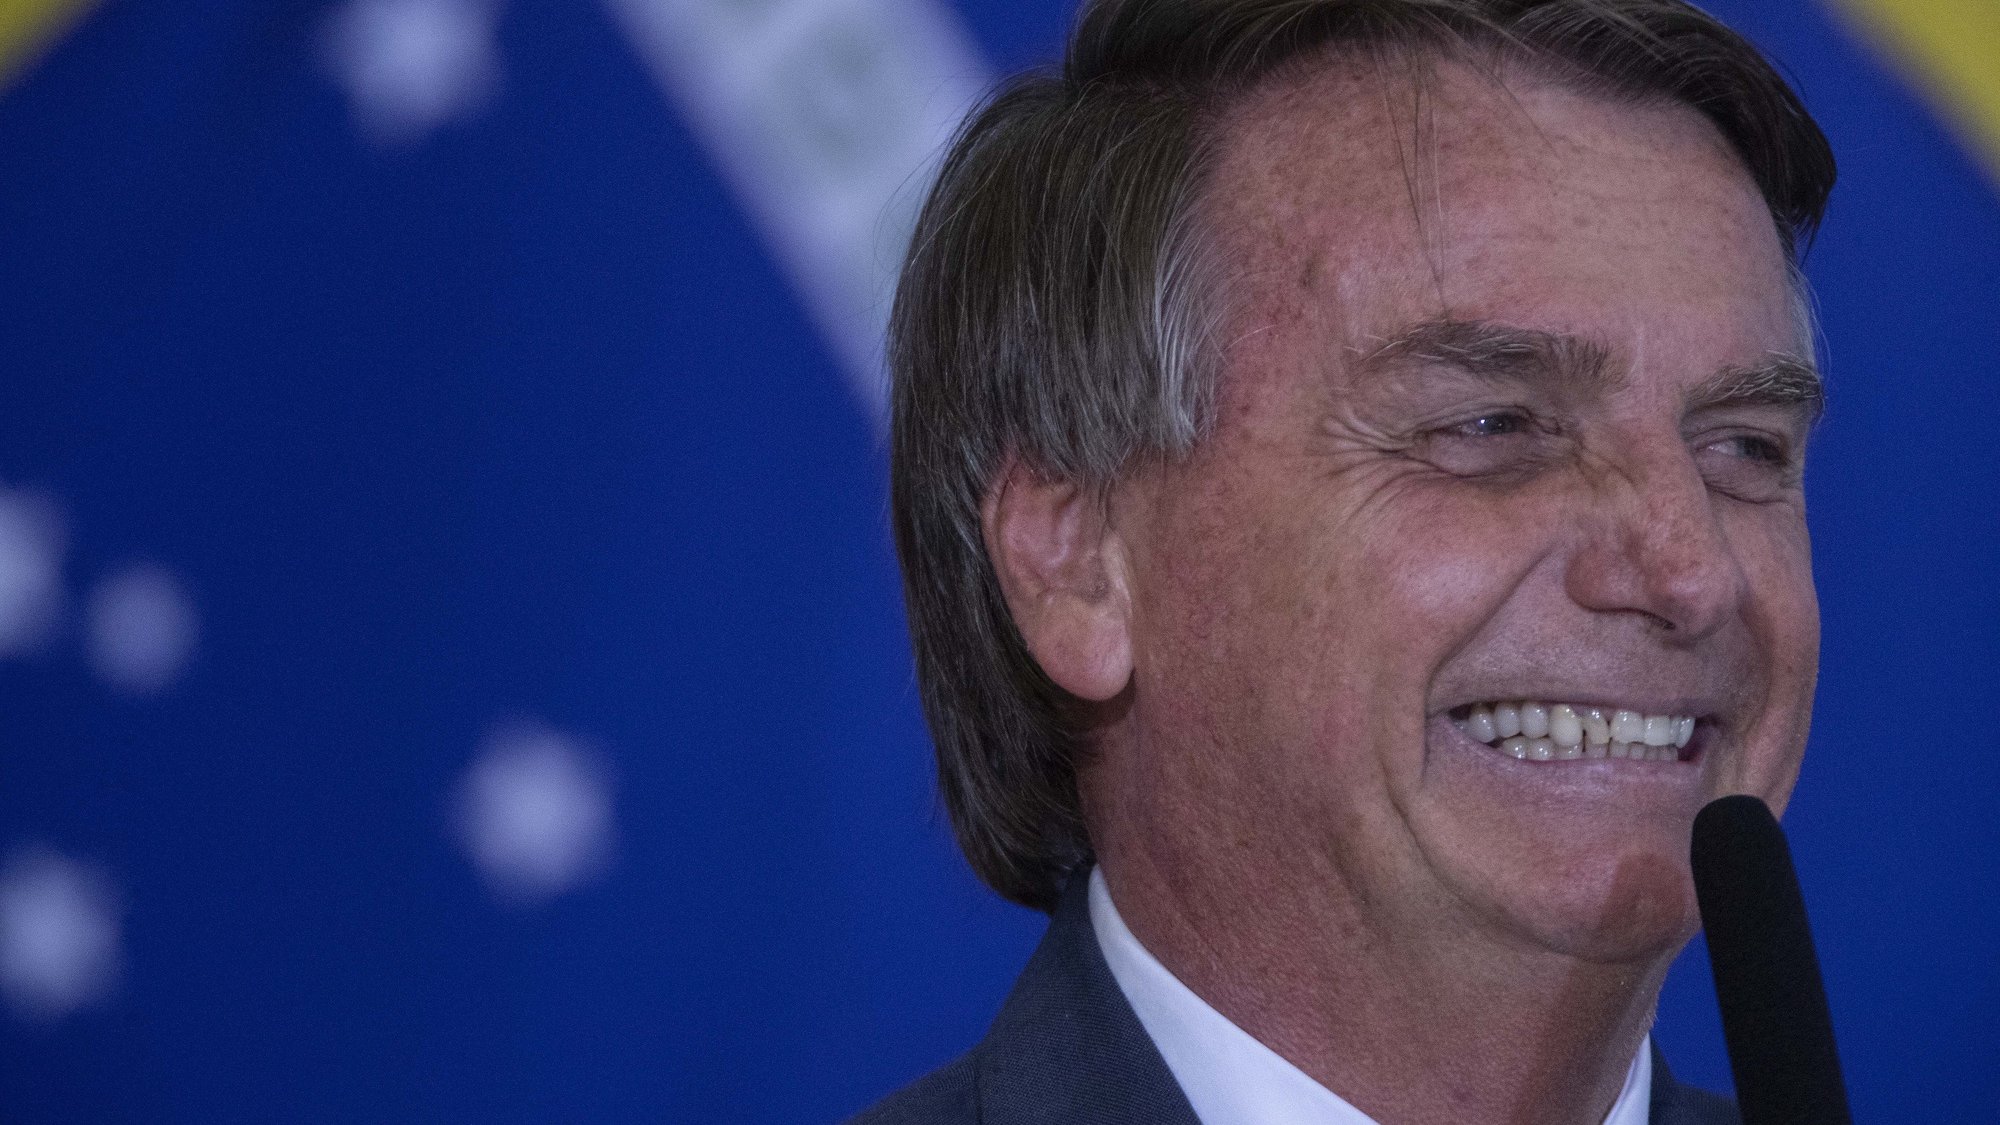 epa09927306 The President of Brazil, Jair Bolsonaro, participates in the ceremony of New Deliveries of the Income and Opportunity Program at  the Palacio do Planalto, in Brasilia, Brazil, 04 May 2022.  EPA/Joedson Alves